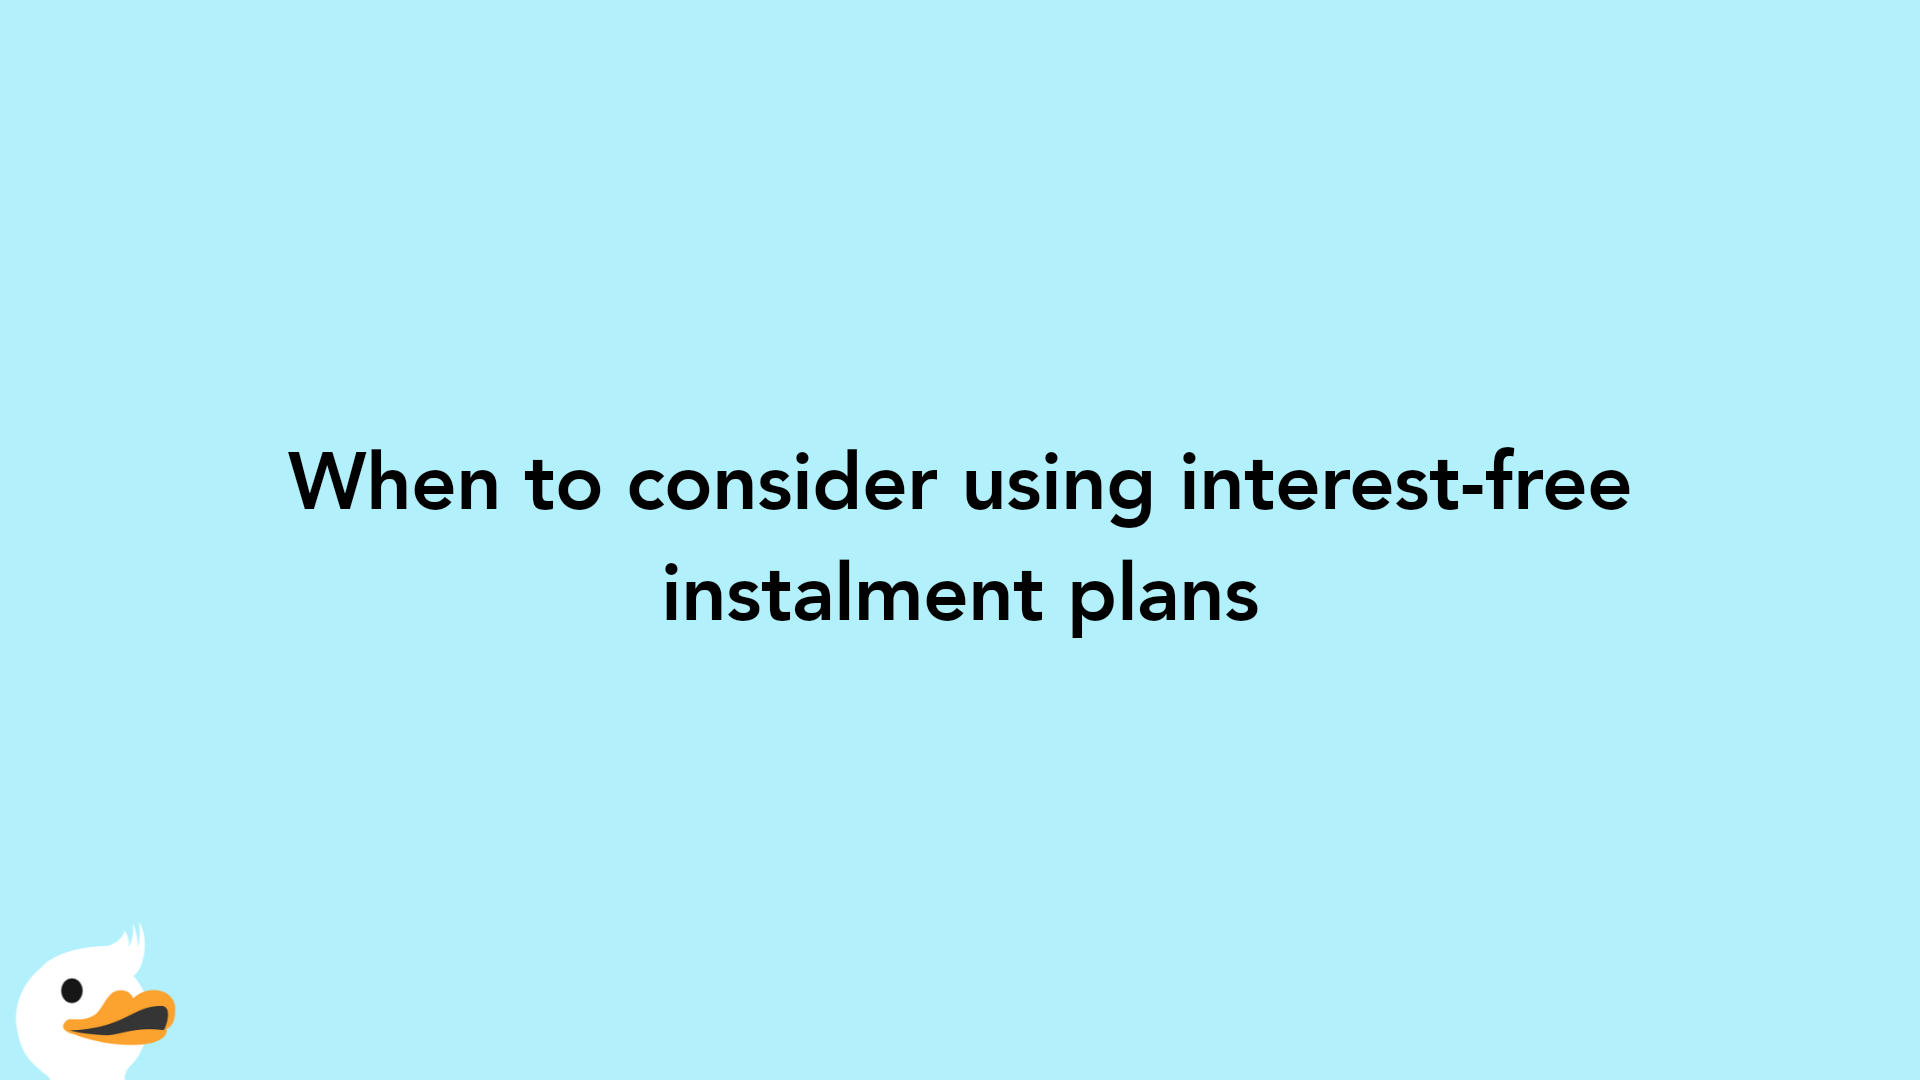 When to consider using interest-free instalment plans